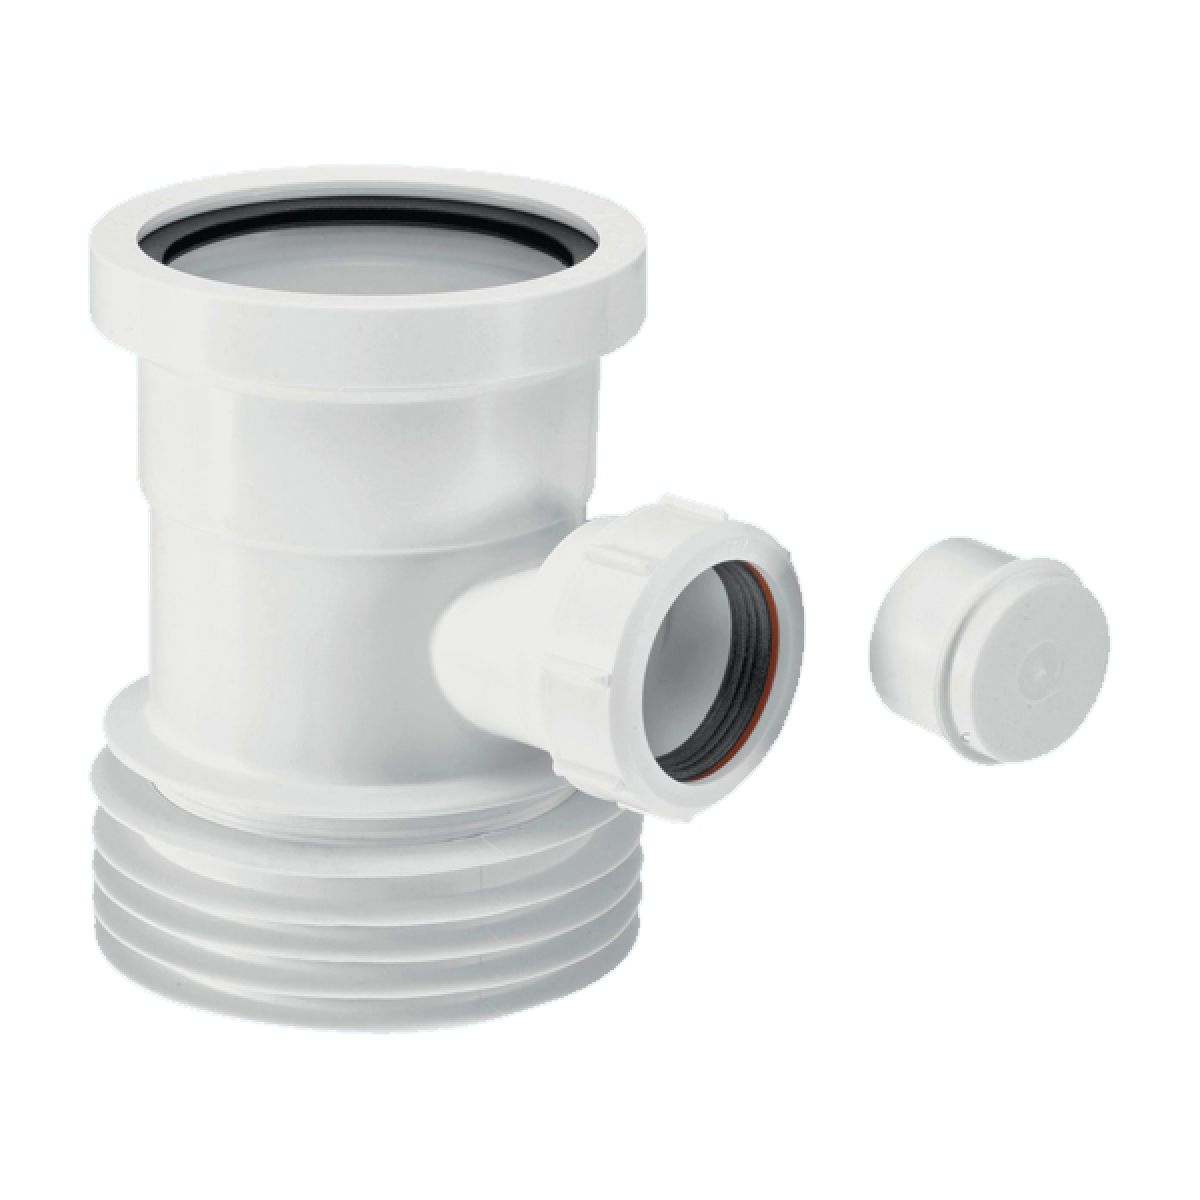 McAlpine Boss Pipe for Use With WC Connectors